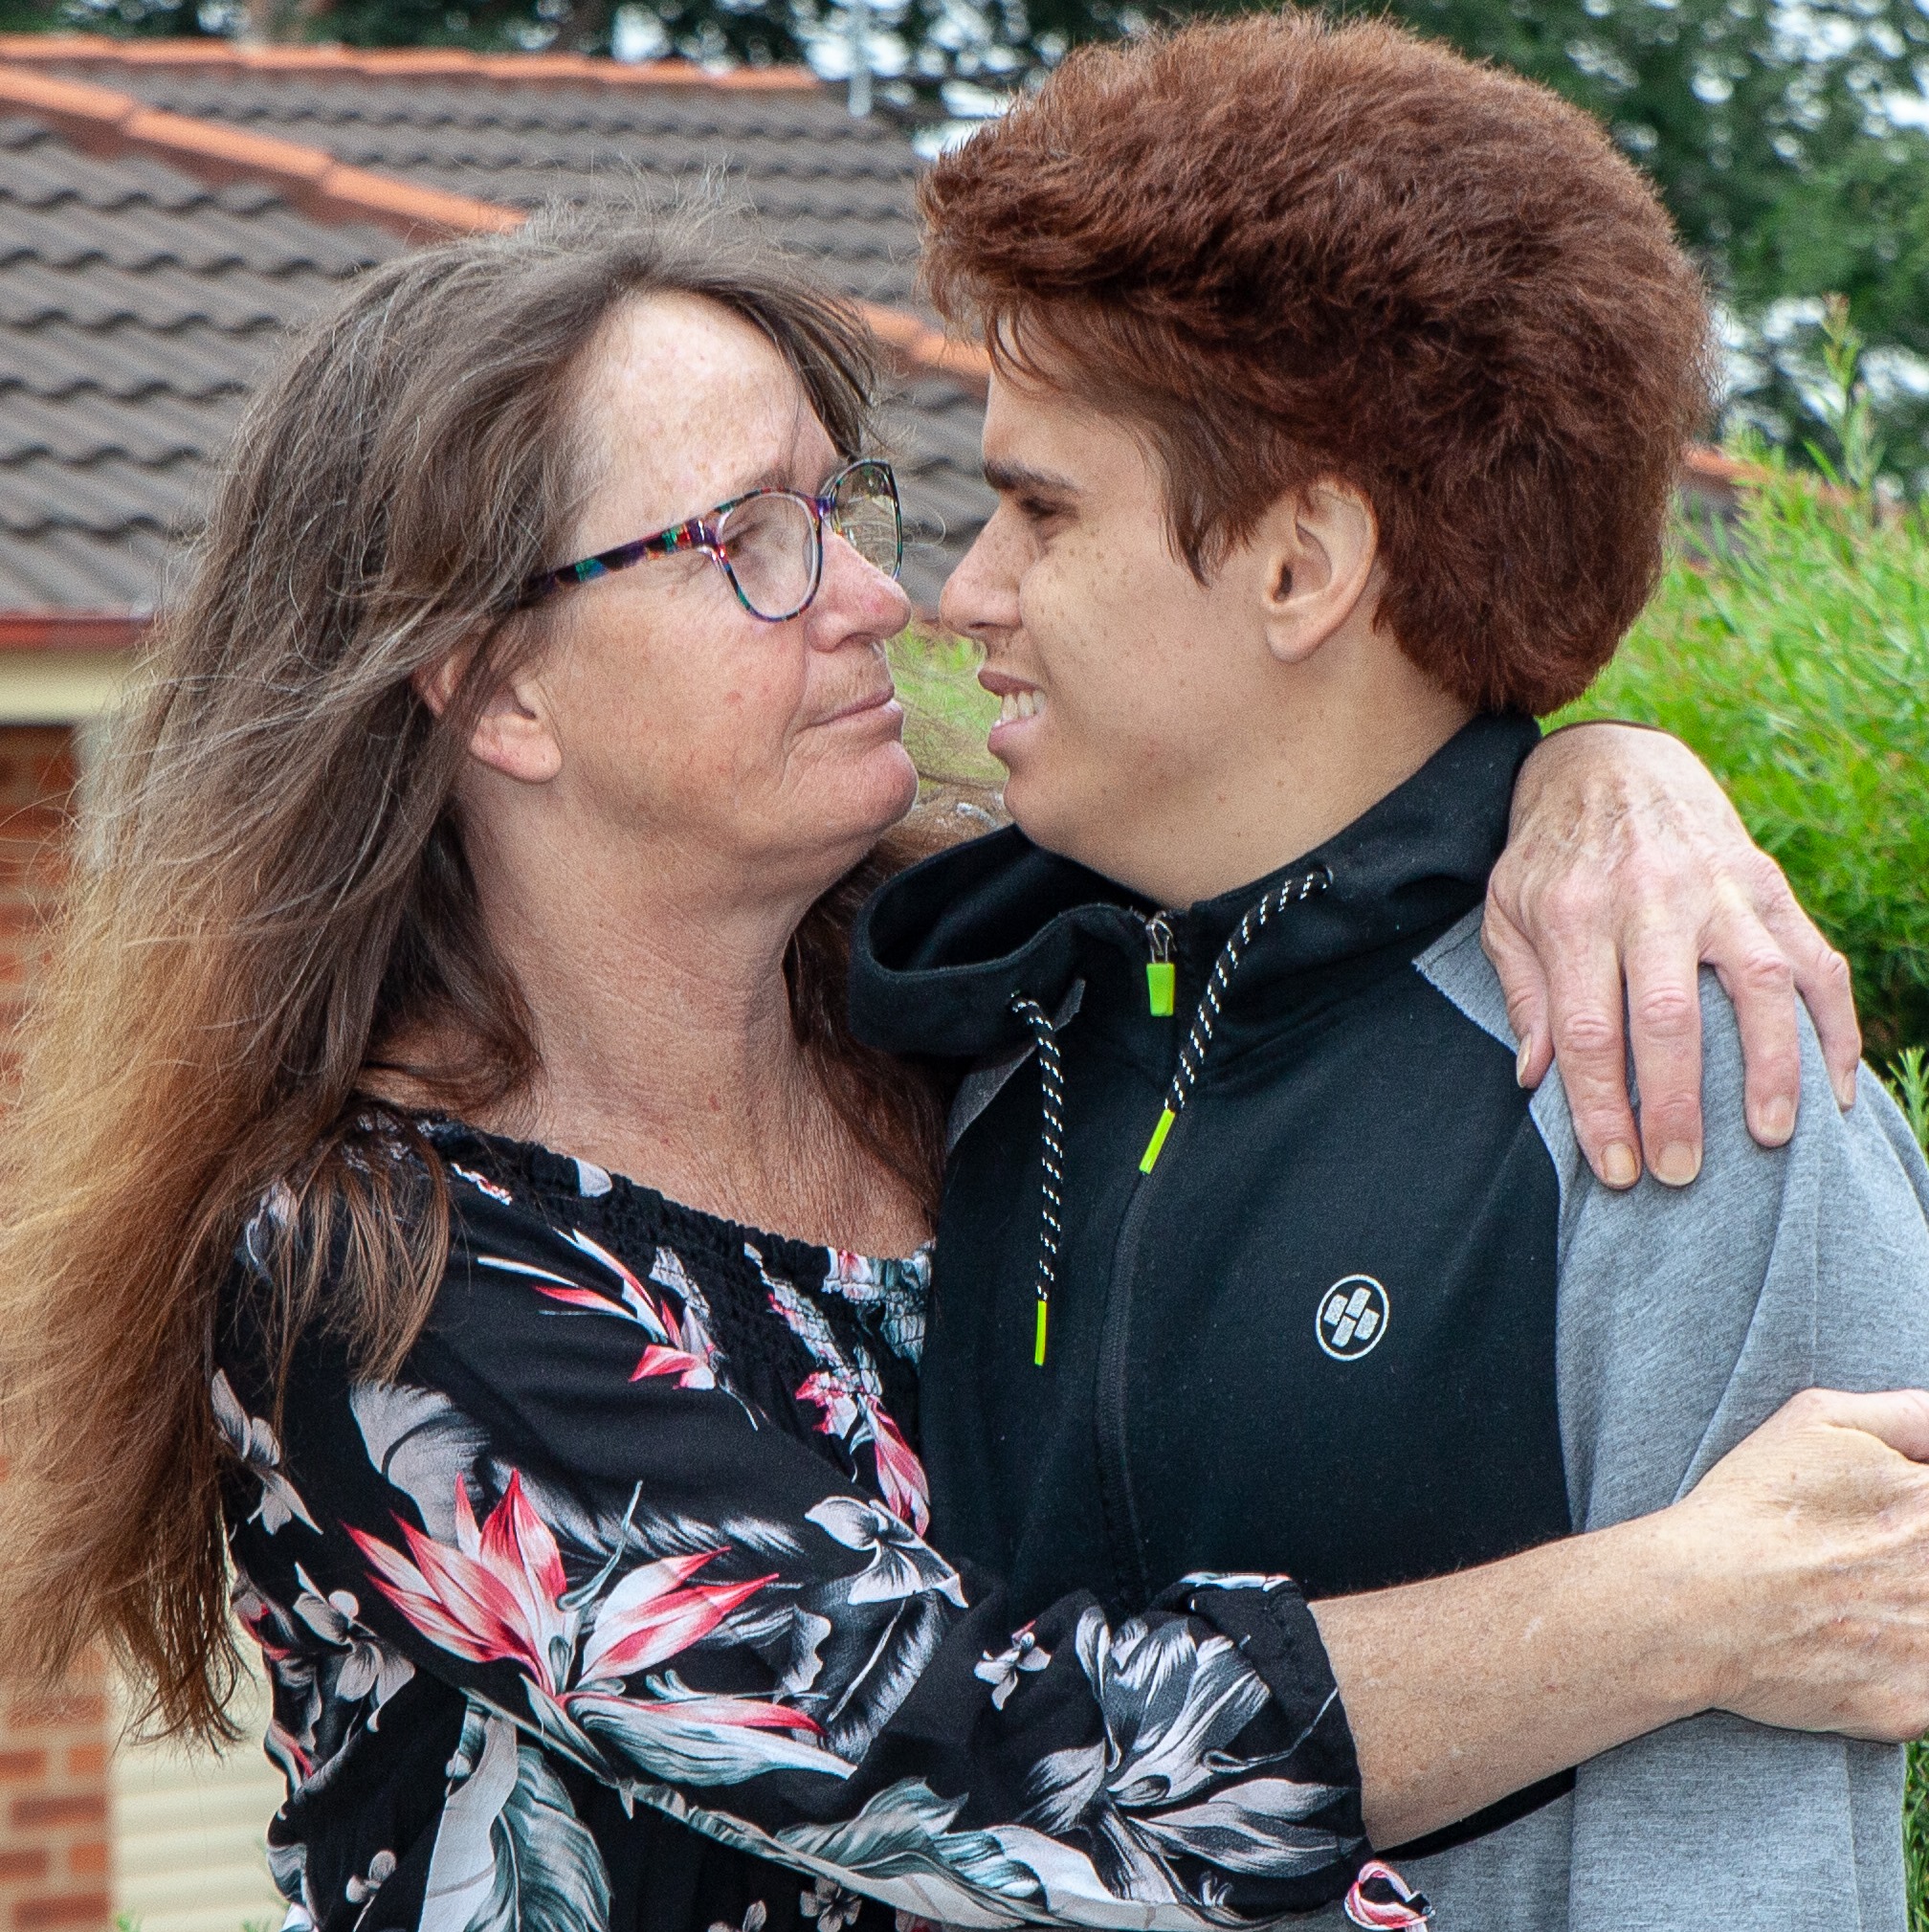 Caleb has autism, needs dialysis and a new kidney but Canberra Hospital says it can't help him